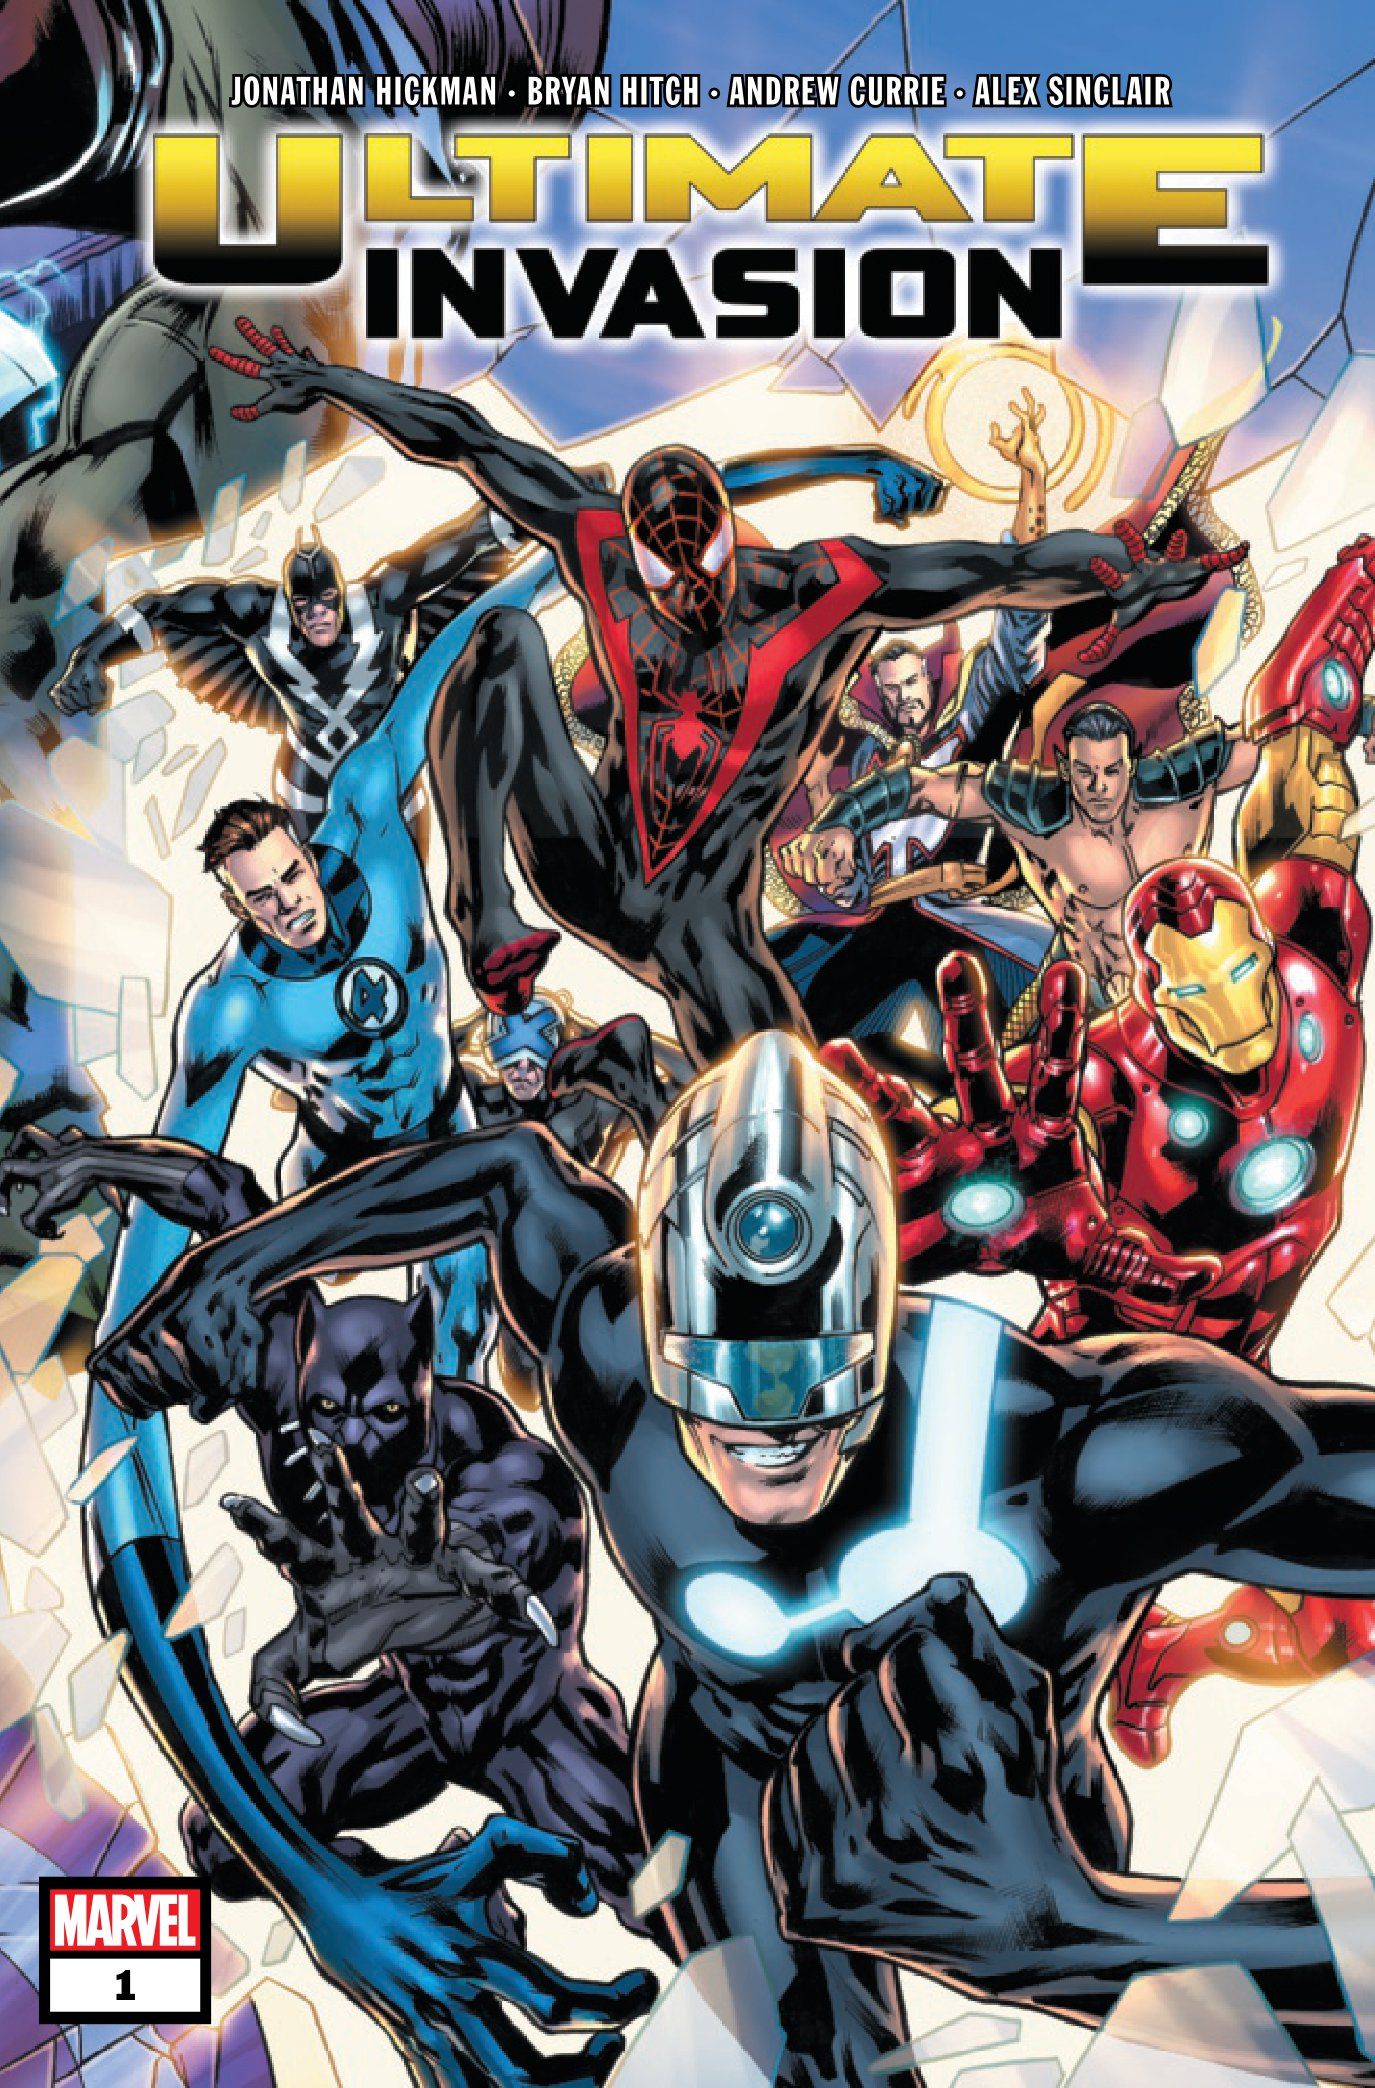 Ultimate Invasion #1 ACover by Bryan Hitch and Alex Sinclair